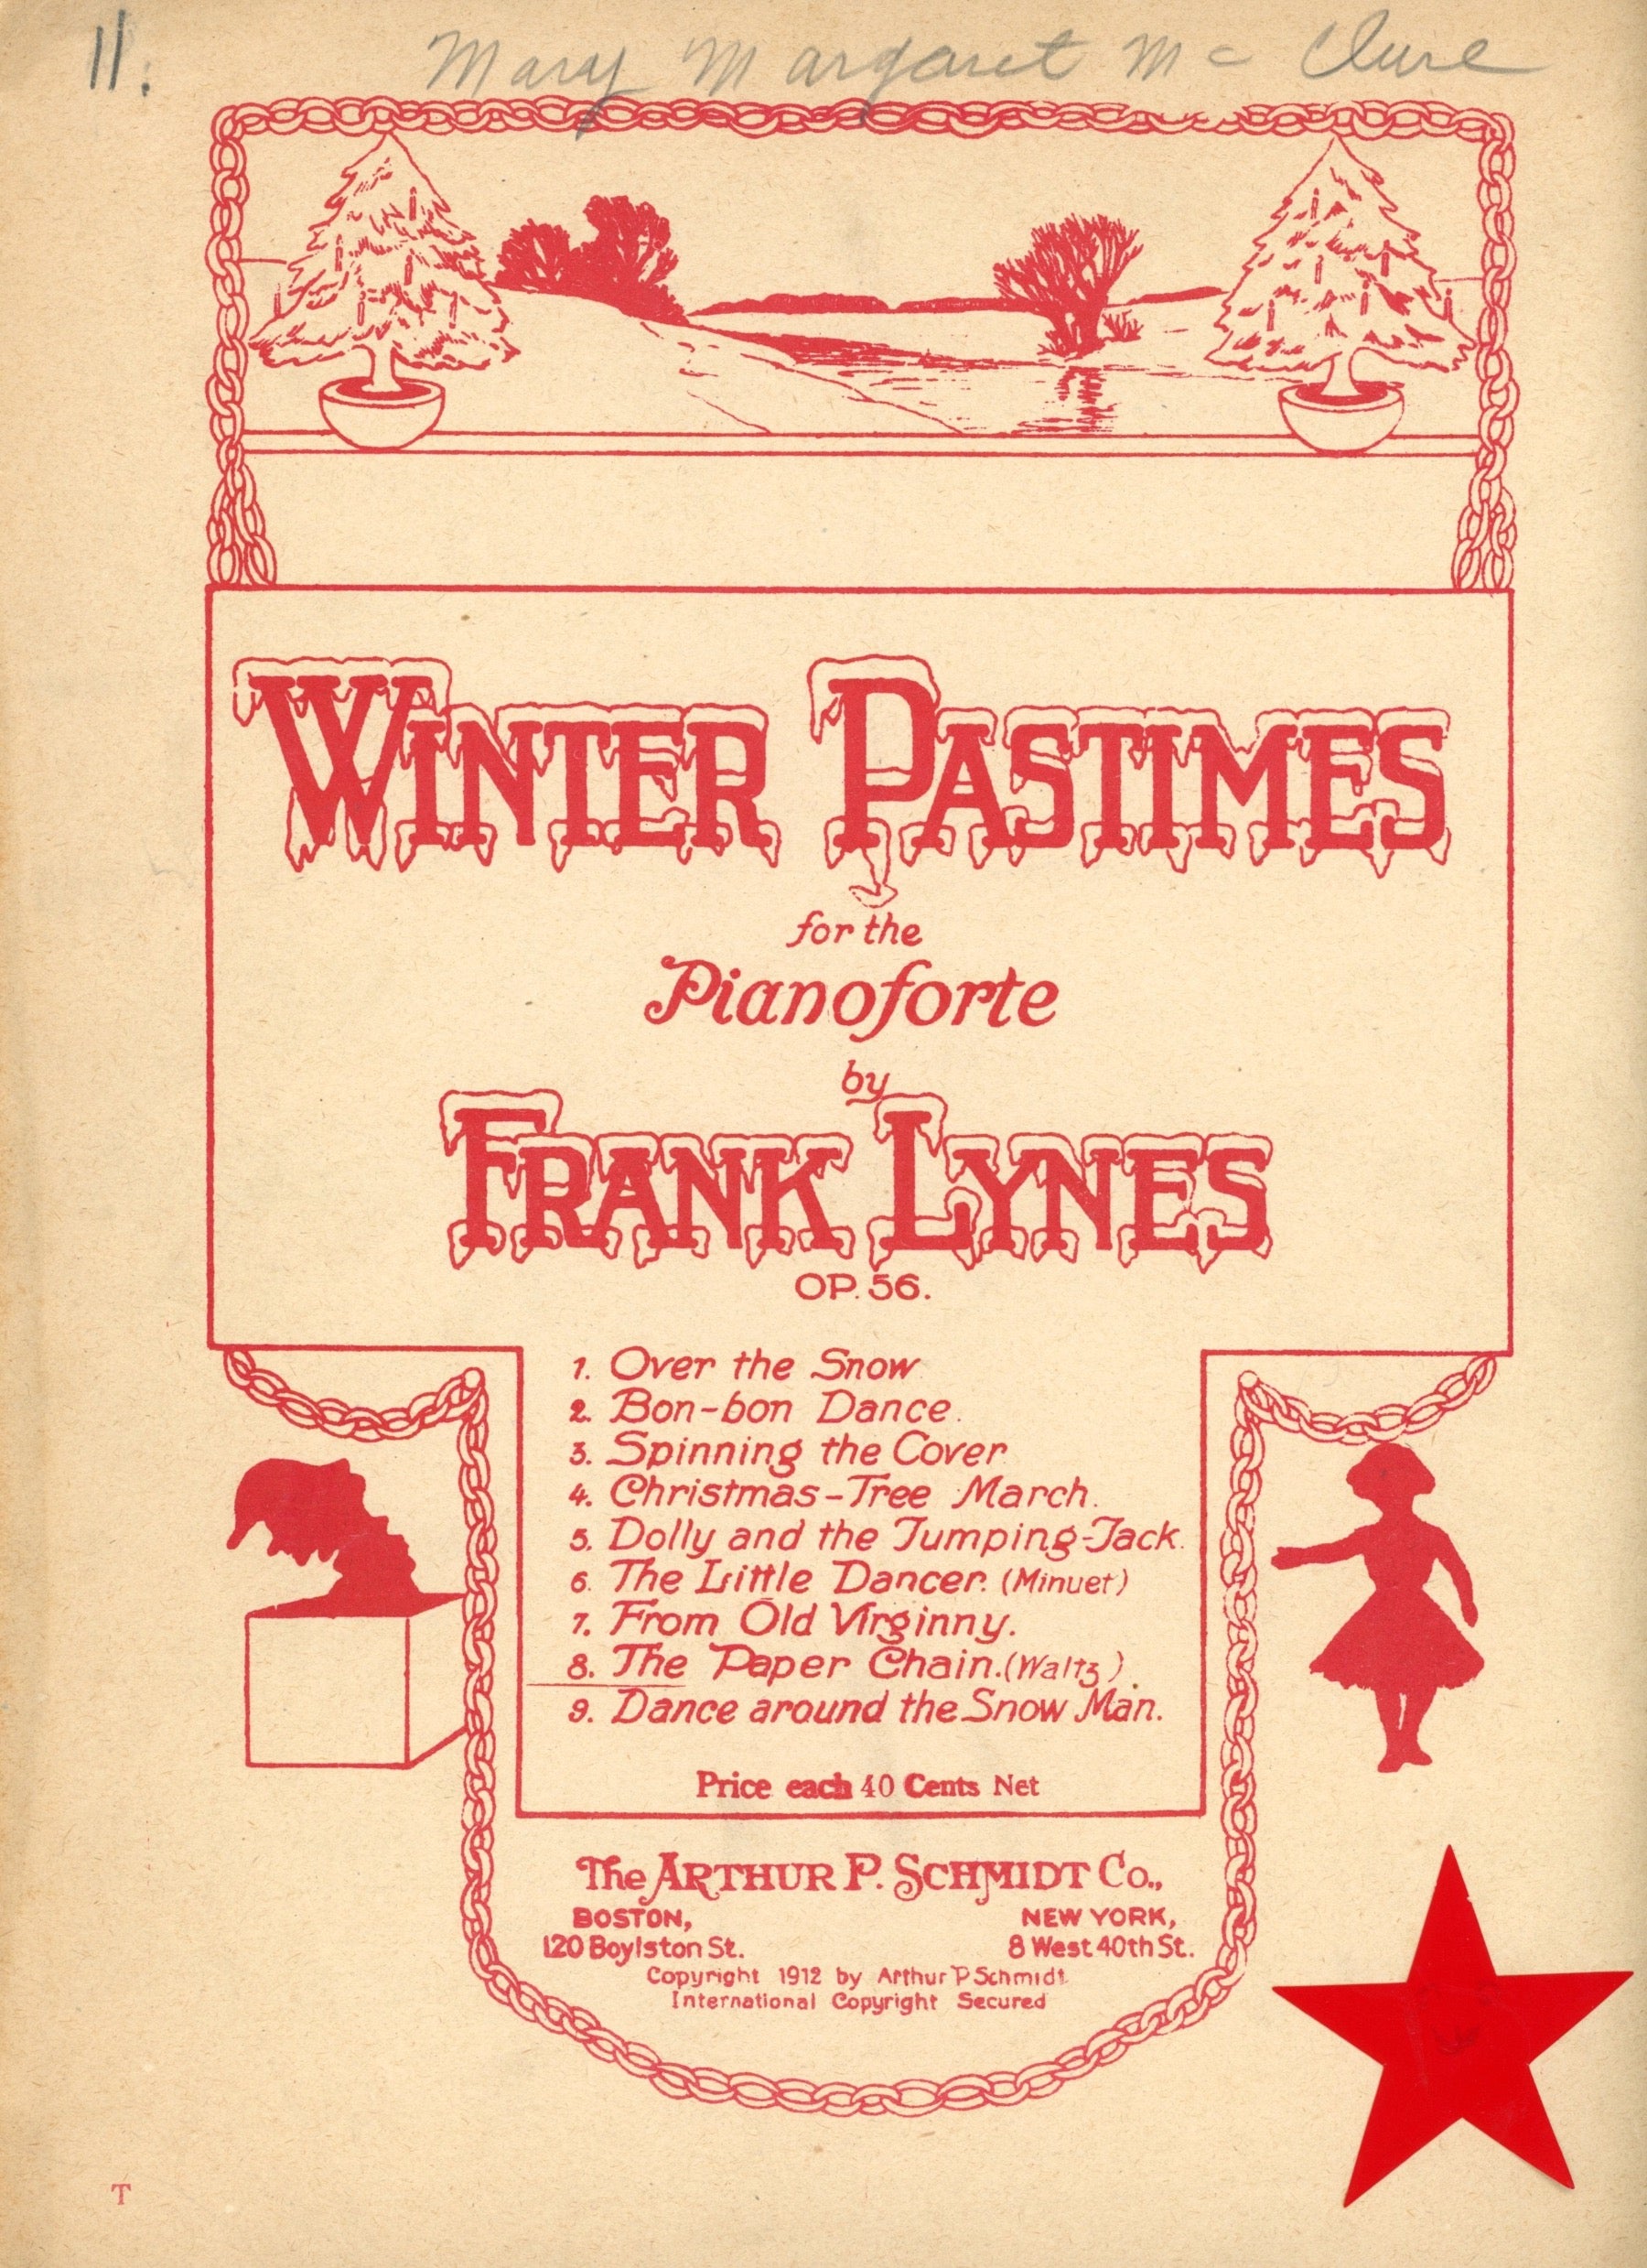 Winter Pastimes for the Pianoforte PAPER CHAIN Waltz by Frank Lynes Vintage Sheet Music ©1912